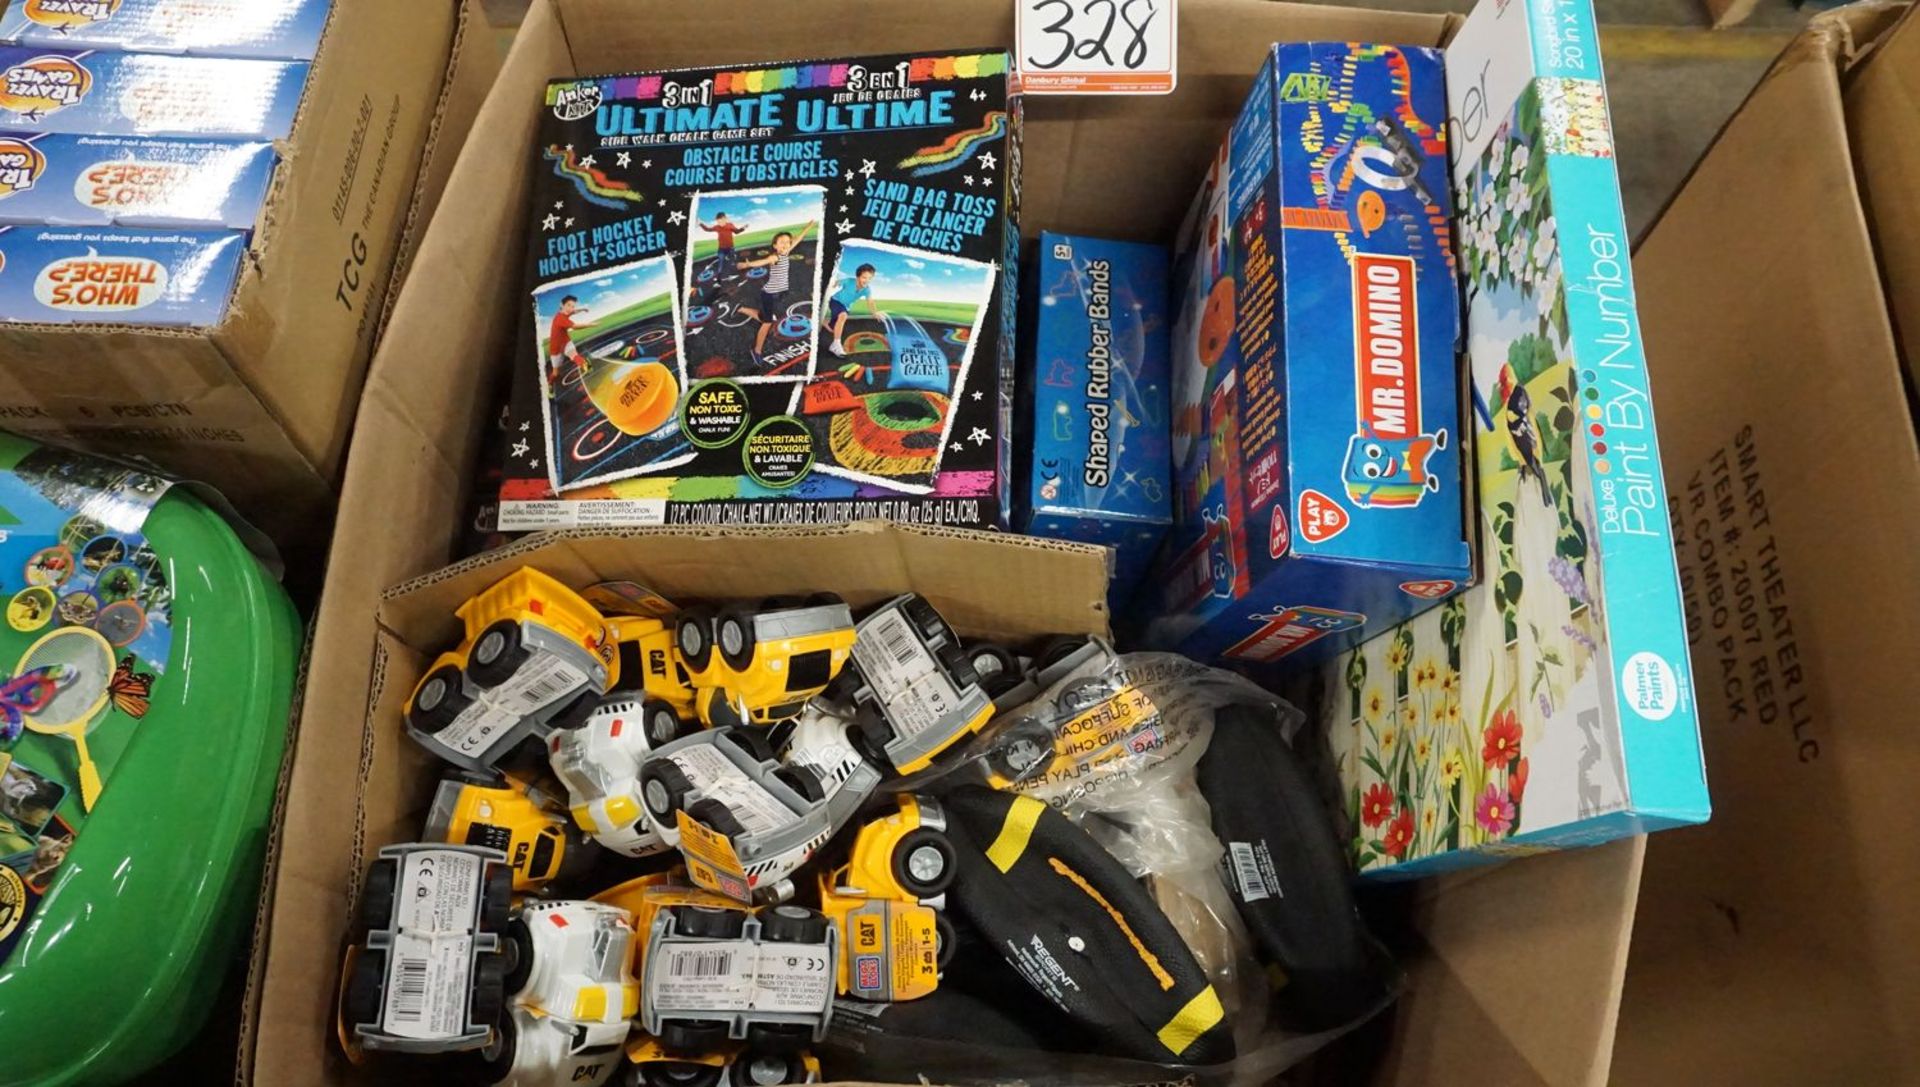 LOT - WHO'S THERE, 3-IN-1 ULTIMATE GAMES, CARS, CONSTRUCTION TRUCKS, POKEMON BATTLE FIGURES (2 - Image 2 of 3